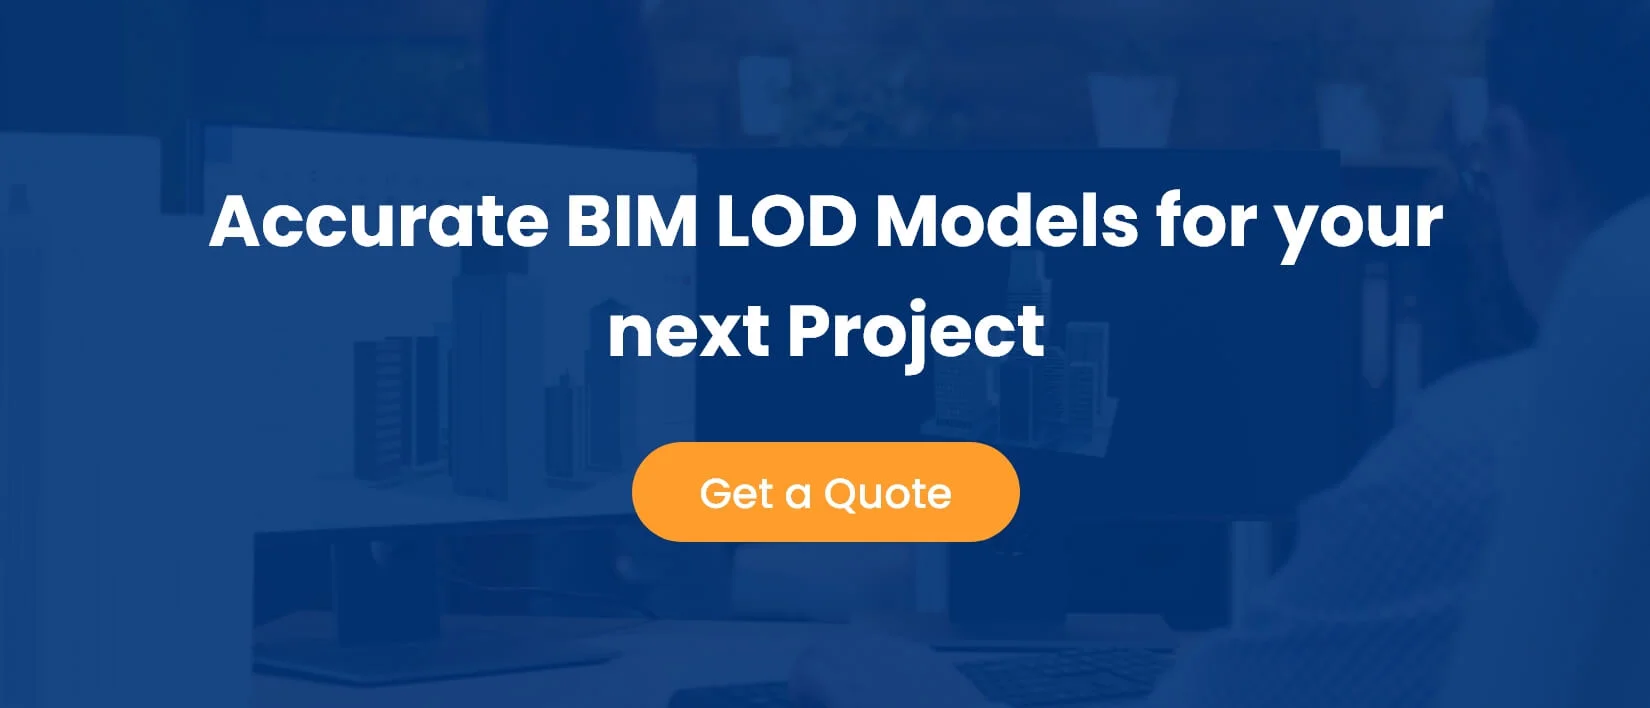 Accurate BIM LOD Models for your next Project